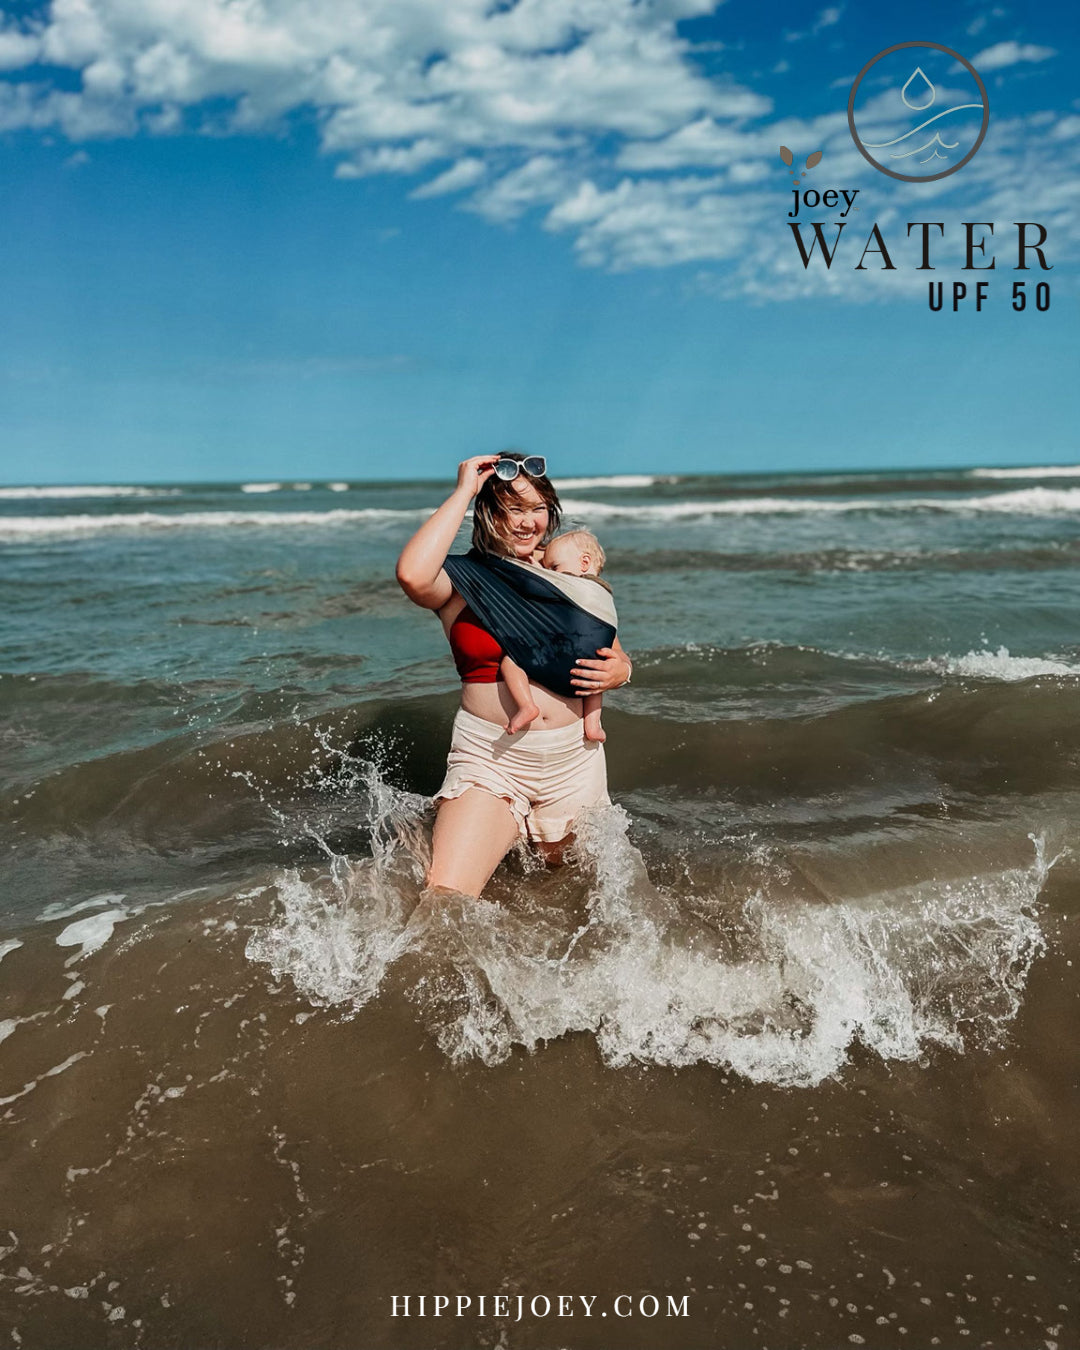 Joey Water ( A waterproof stretchy Sling/ Wrap/ baby carrier type assistant garment)  being used by a mom smiling in the ocean